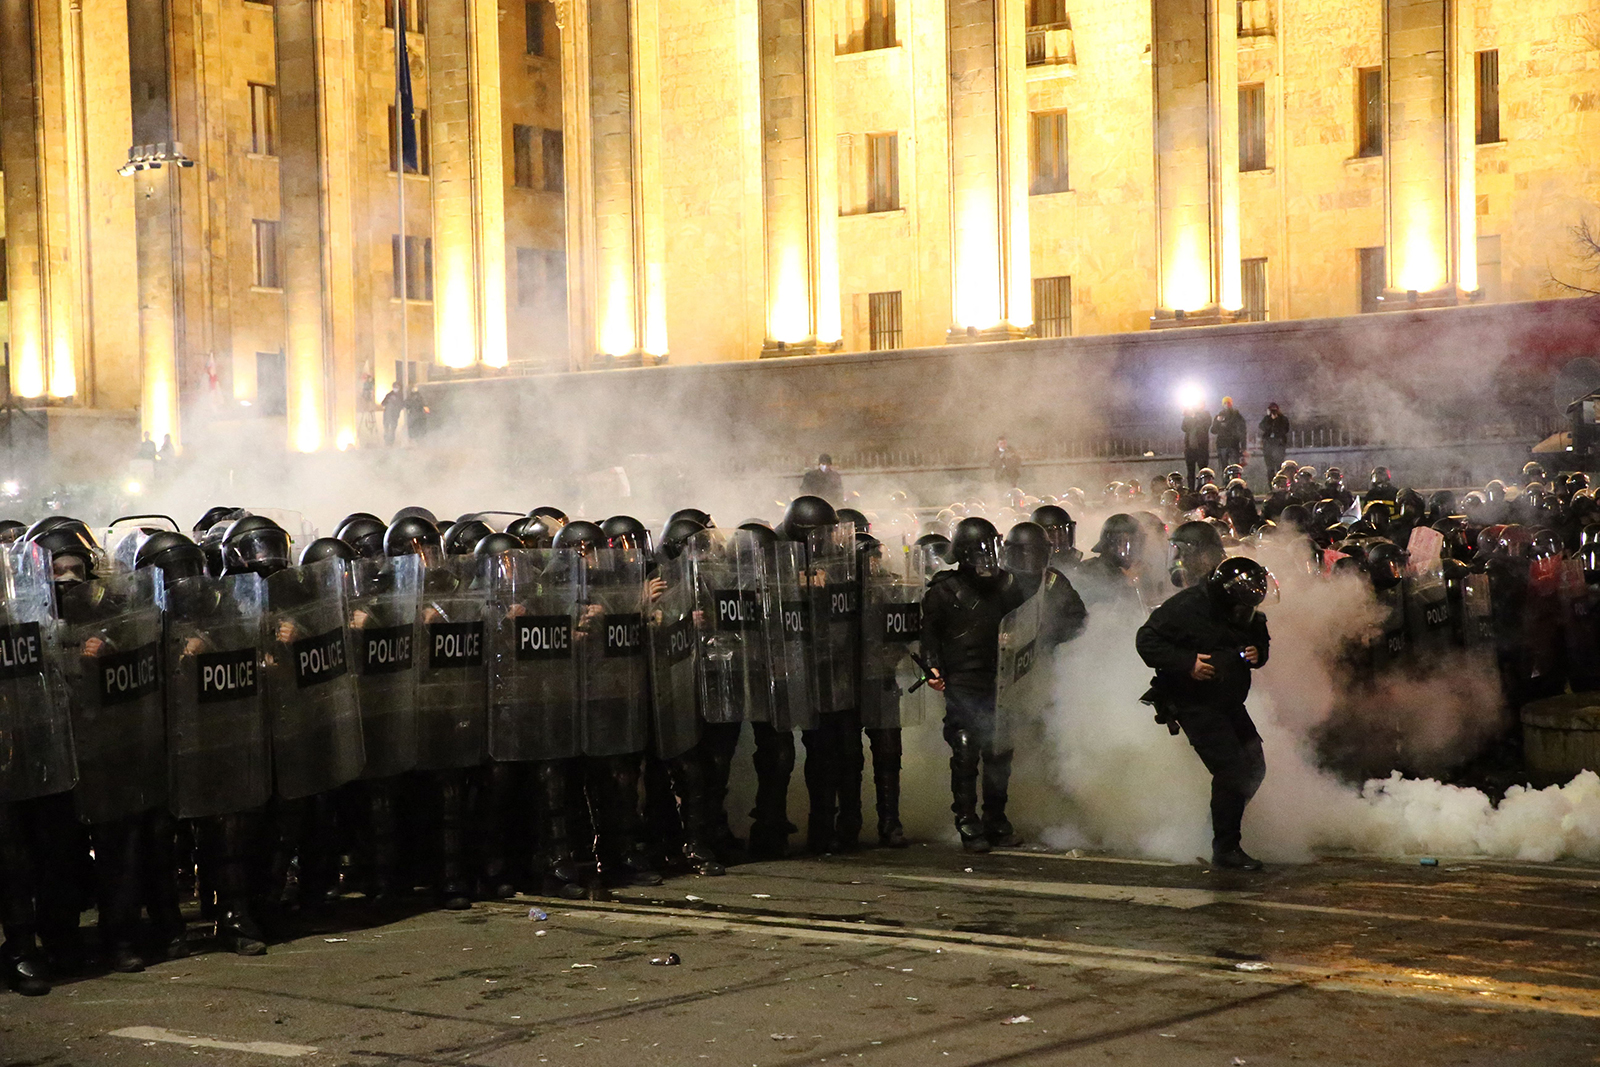 Police in riot gear face protesters in Tbilisi early on March 9.